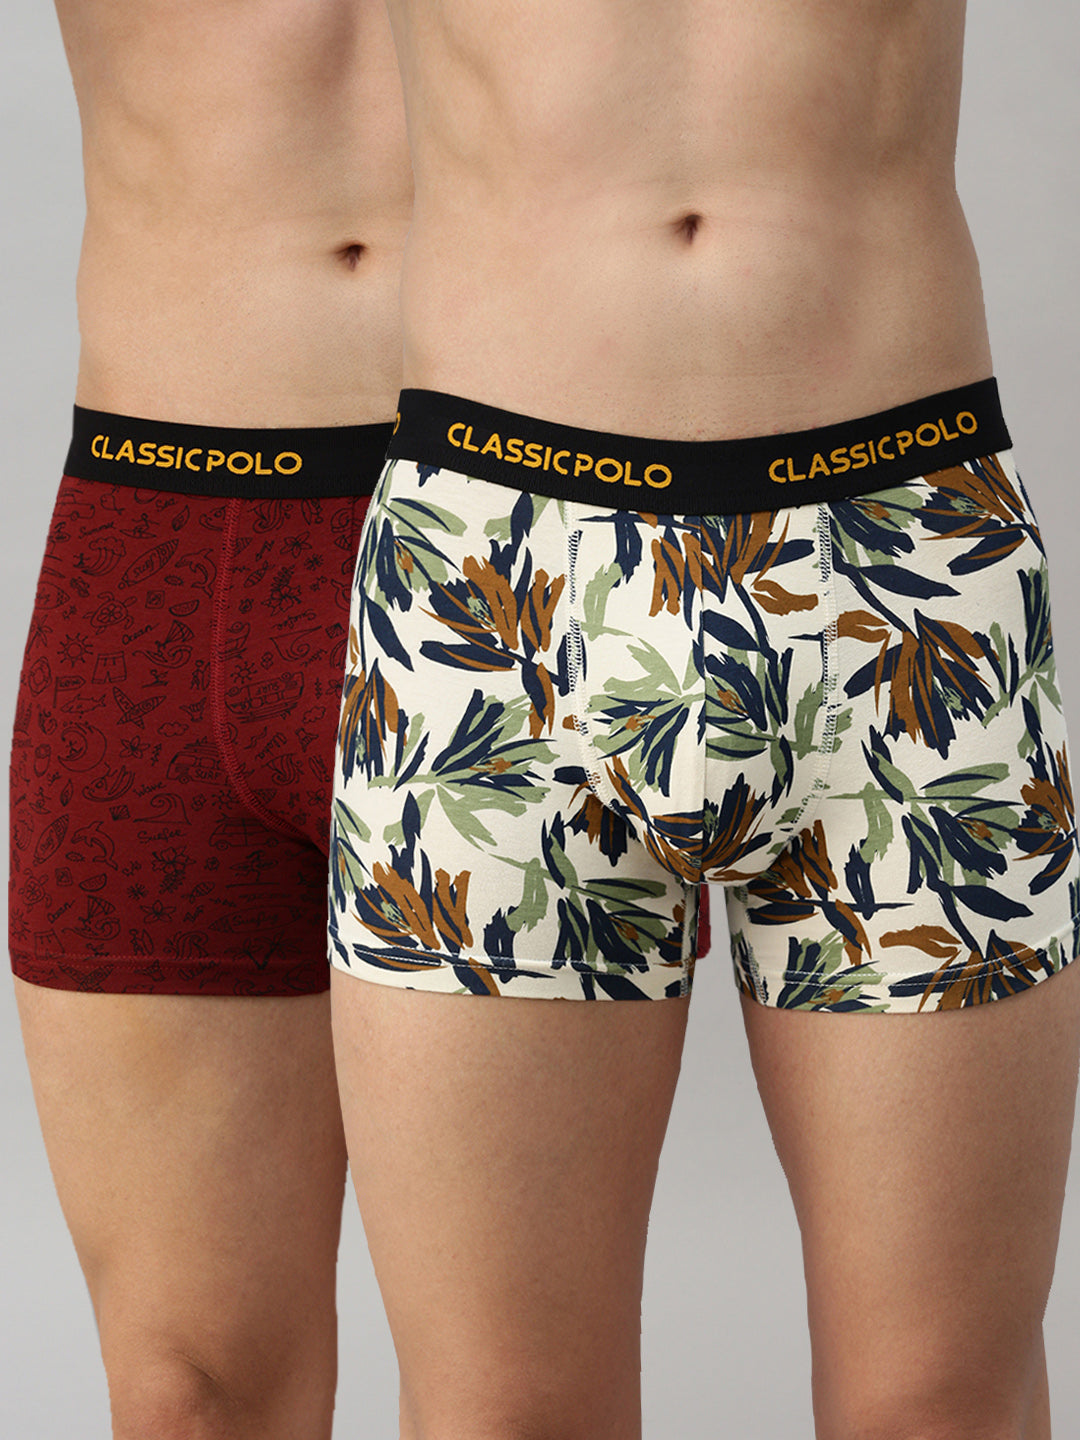 Classic Polo Men's Modal Printed Trunks | Glance - Red & Yellow (Pack of 2)